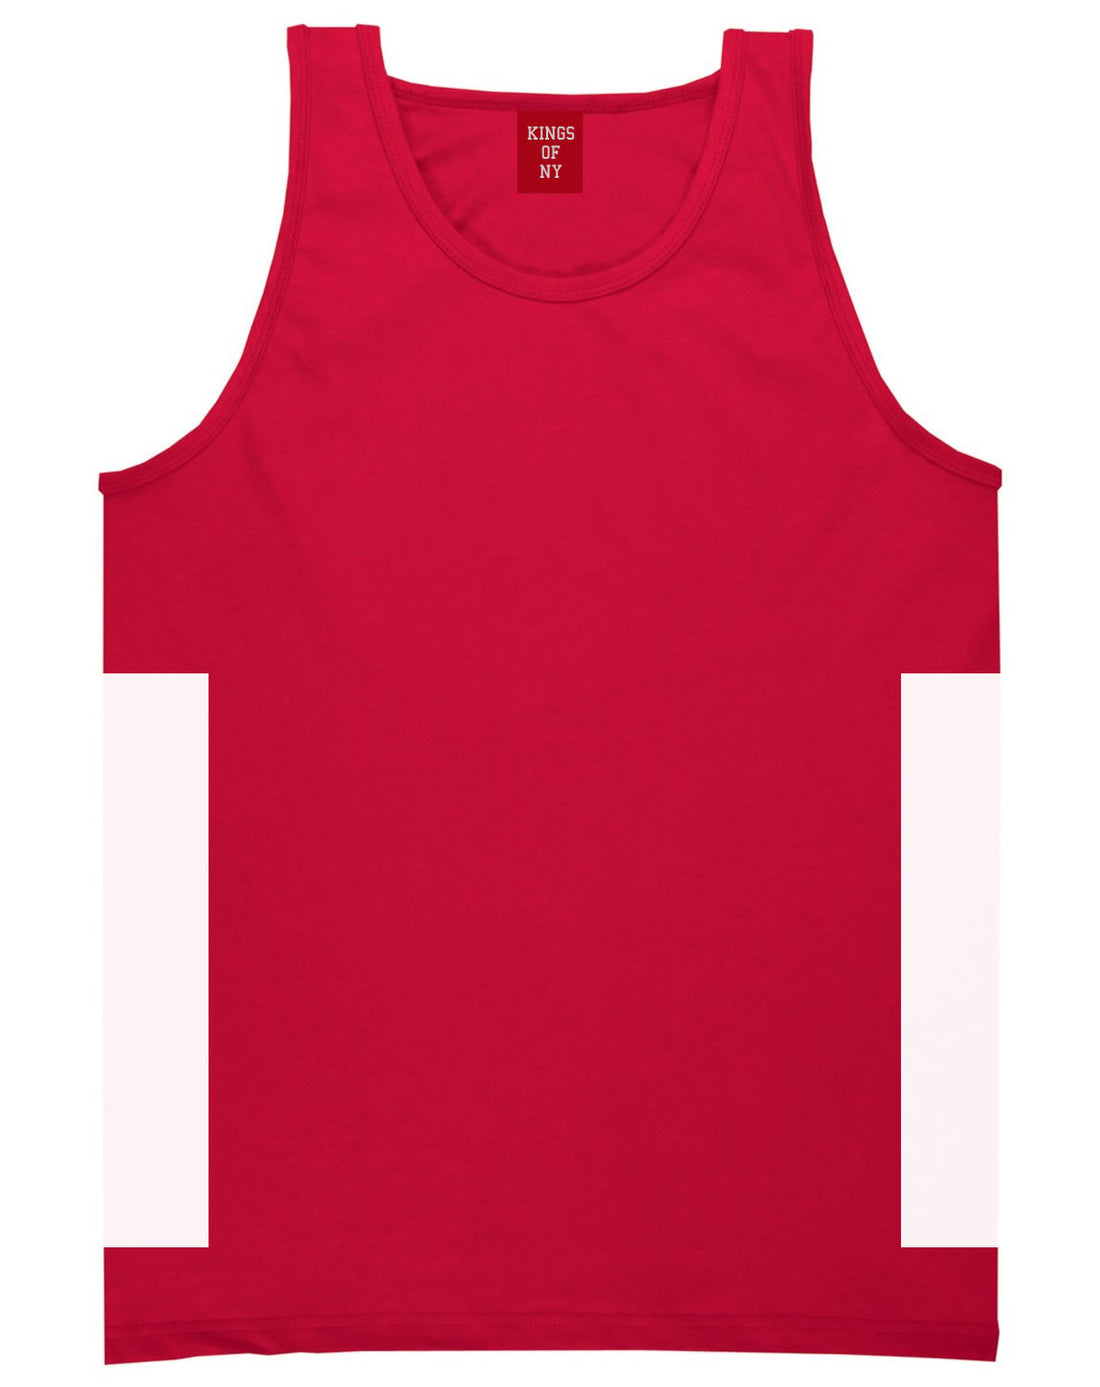 Side Box Hood Tank Top in Red by Kings Of NY